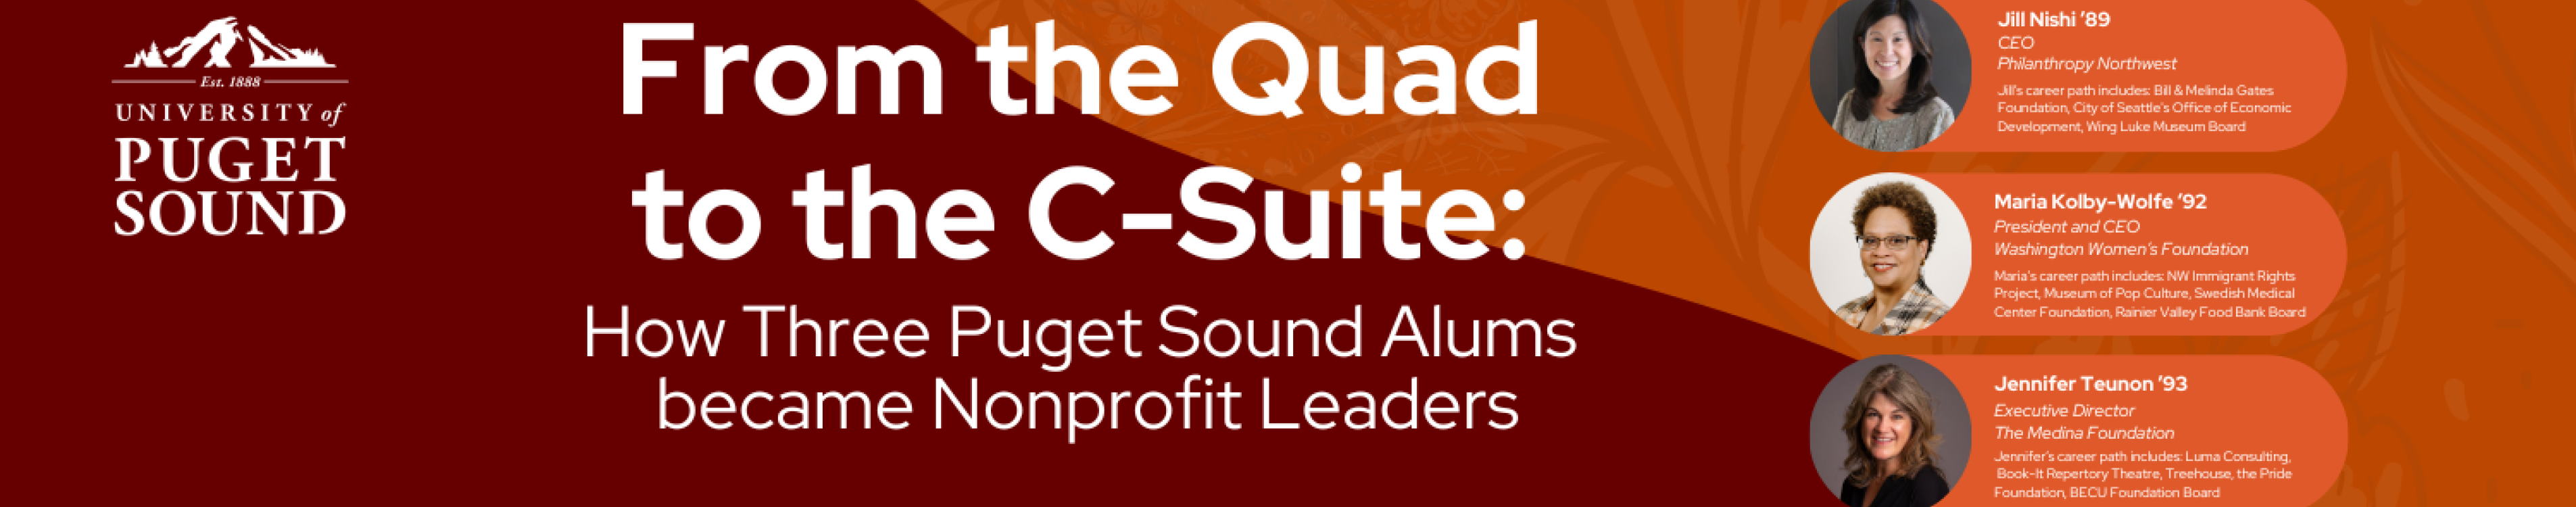 From the Quad to the CSuite